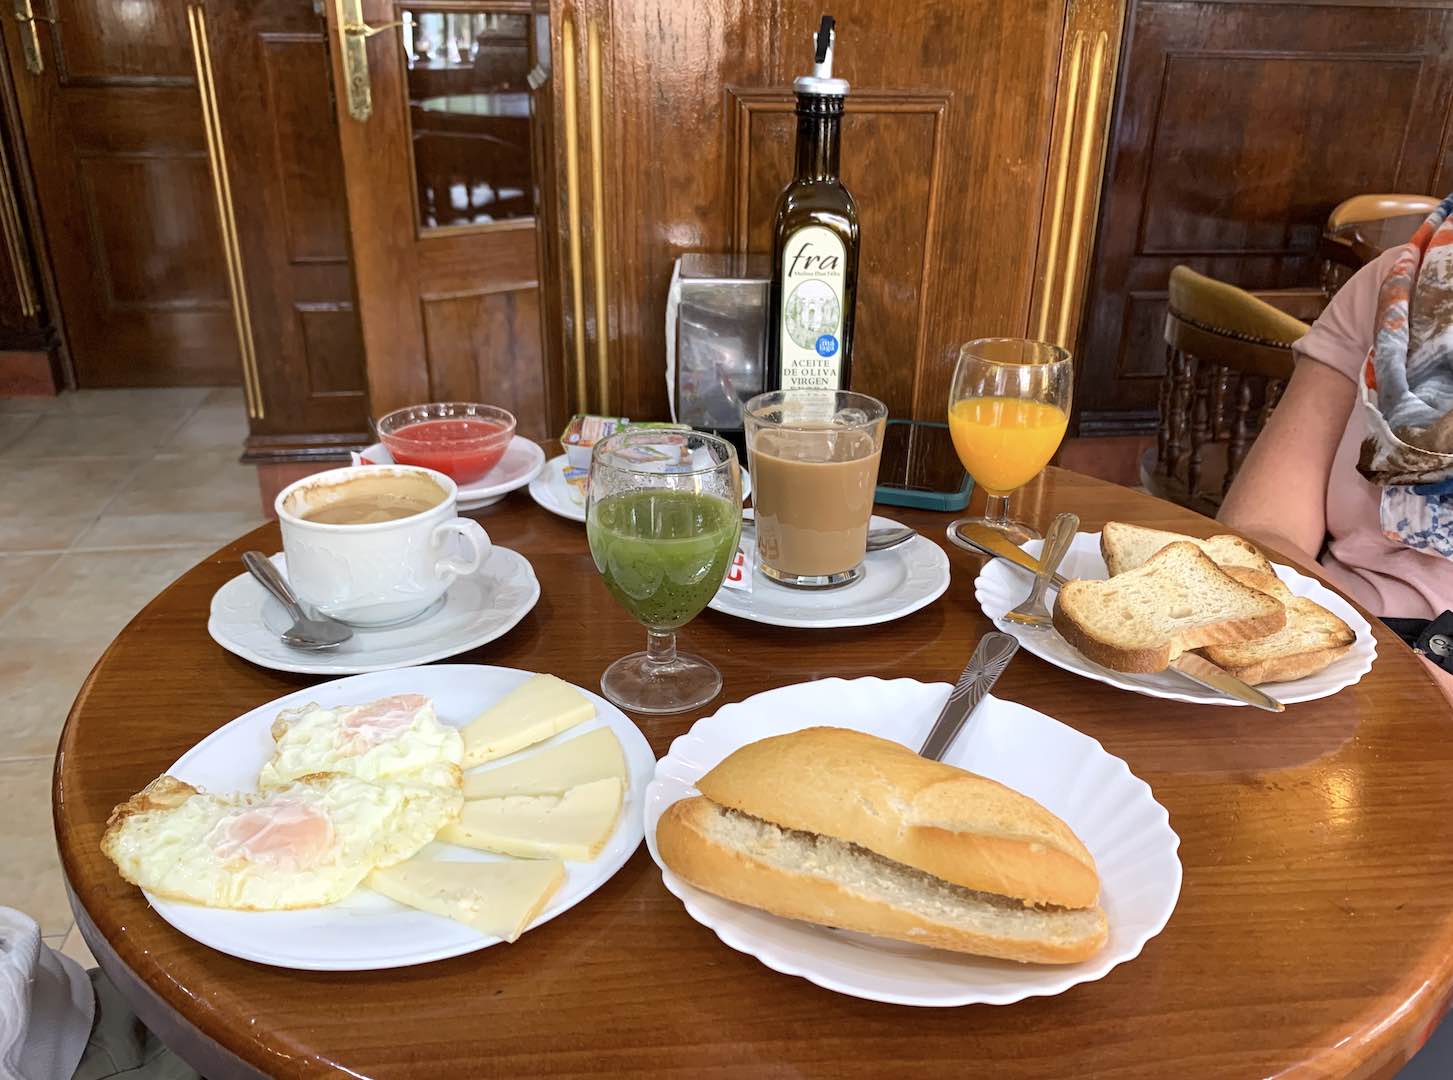 A complete breakfast with coffee and fresh juice for about $20? Not bad!